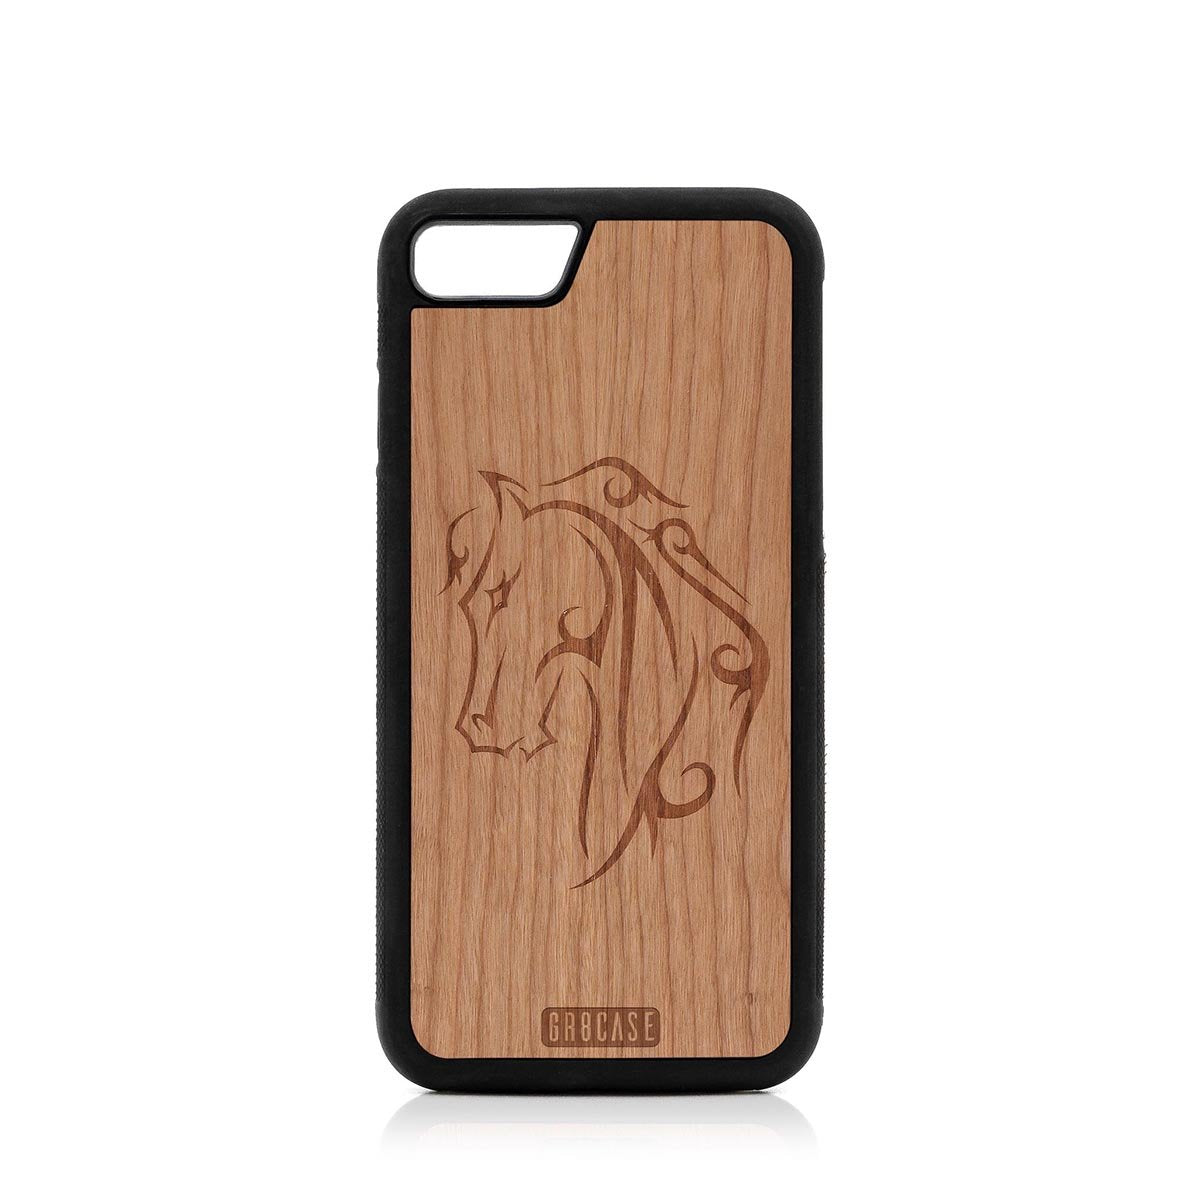 Horse Tattoo Design Wood Case For iPhone SE 2020 by GR8CASE